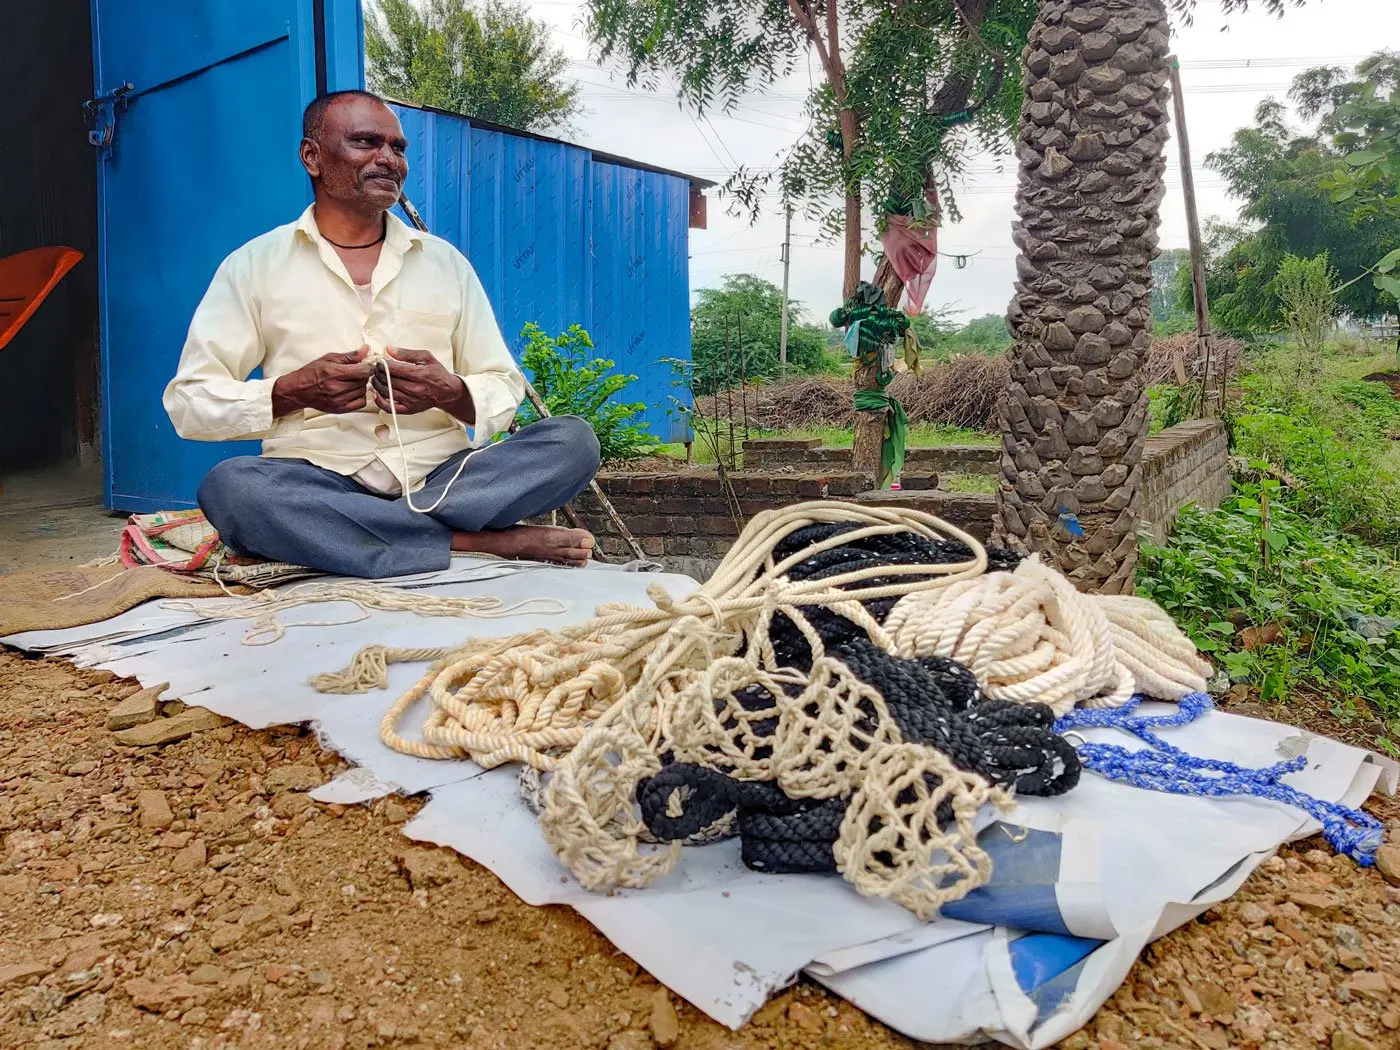 Man sitting with ropes he typically sells at the market